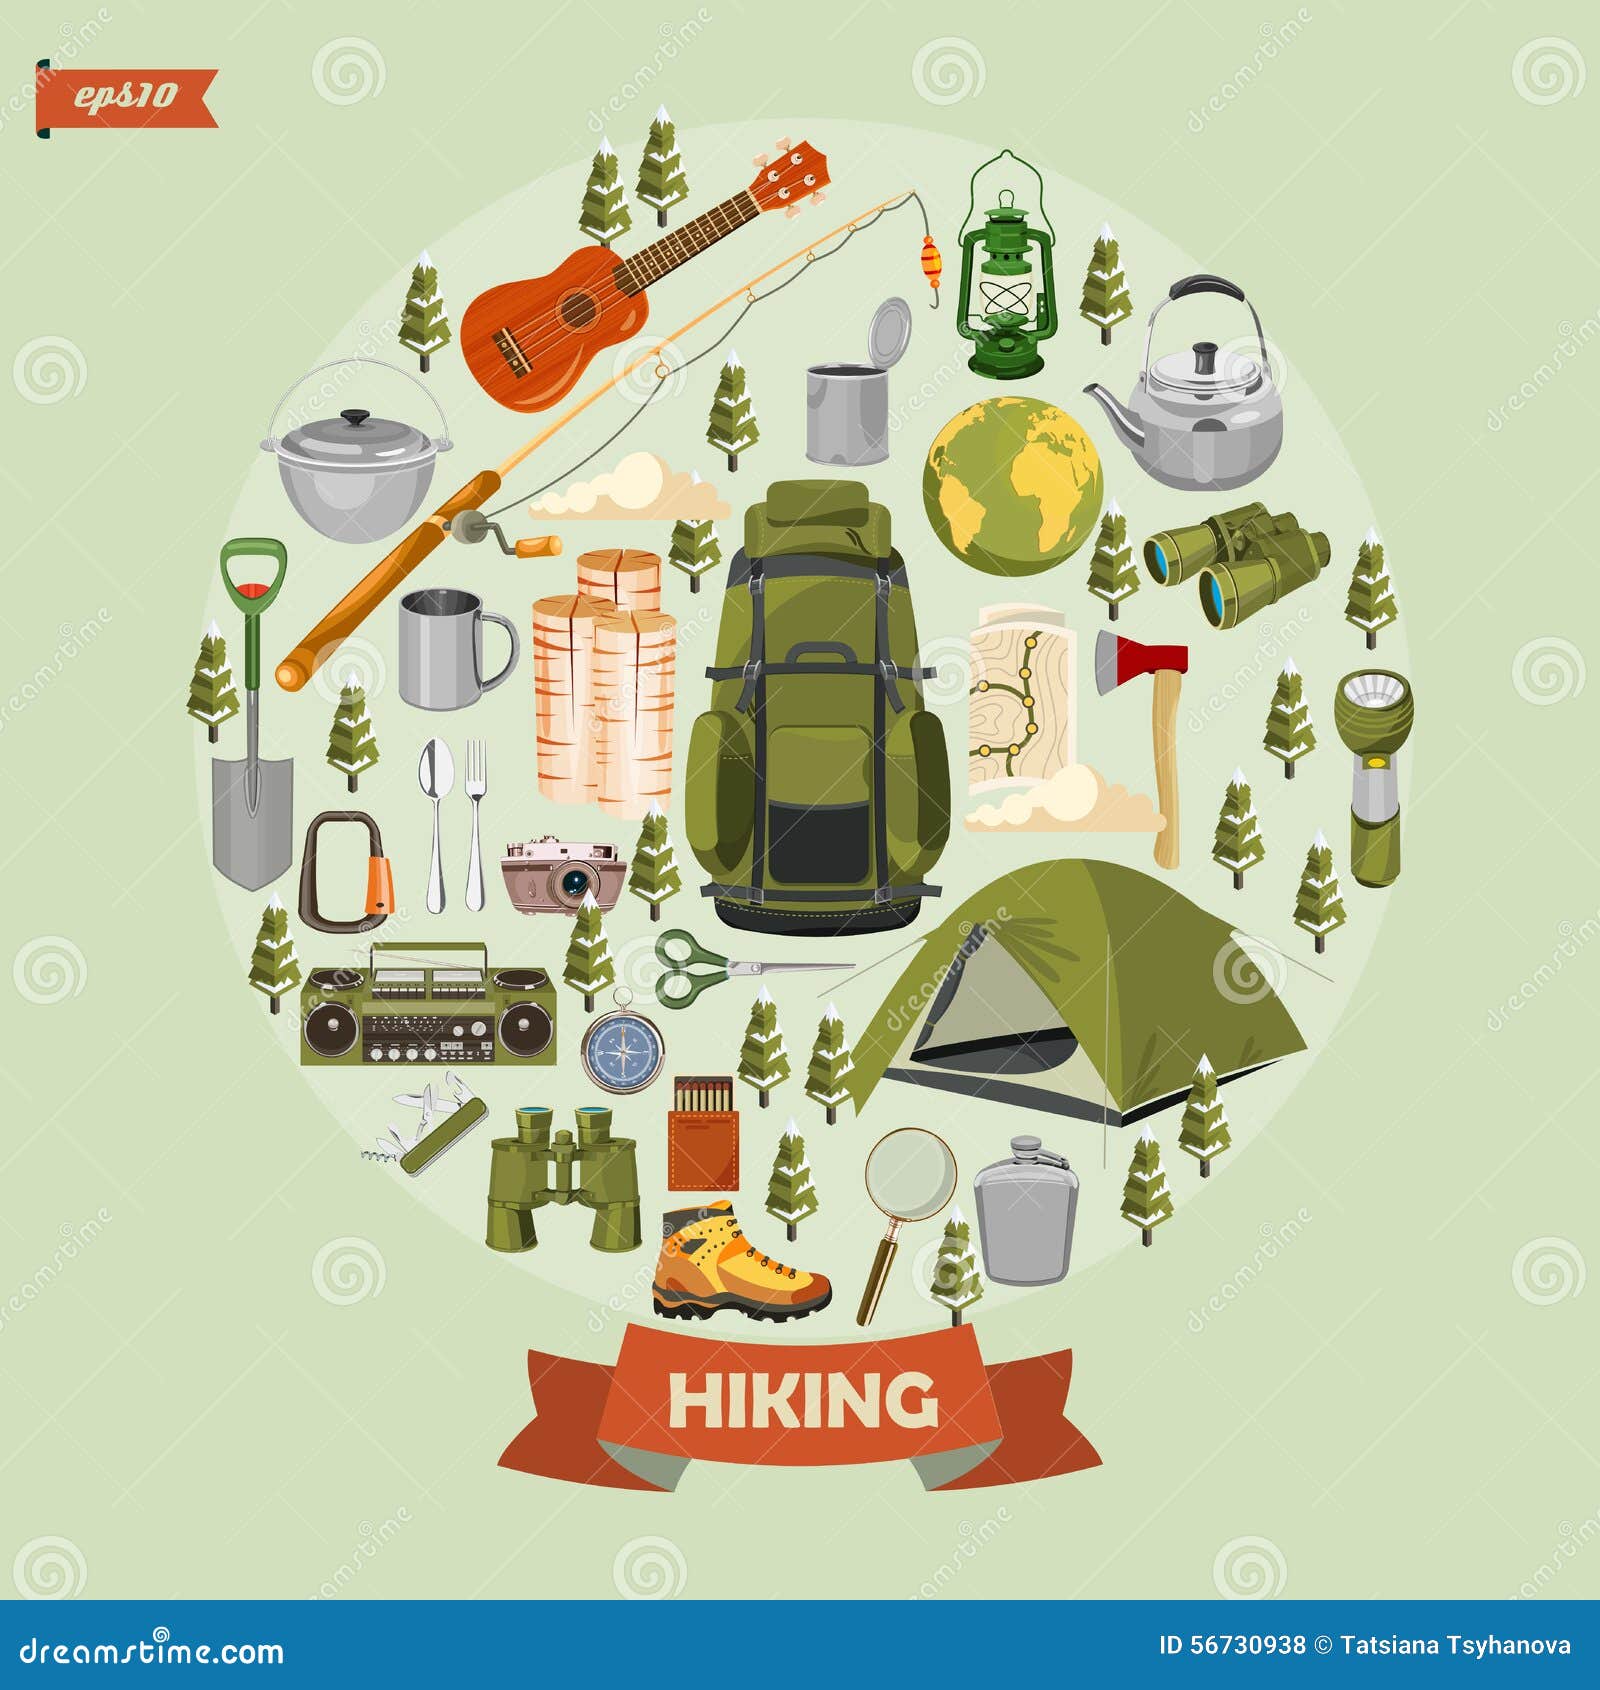   with equipments for hiking and camping on circle .